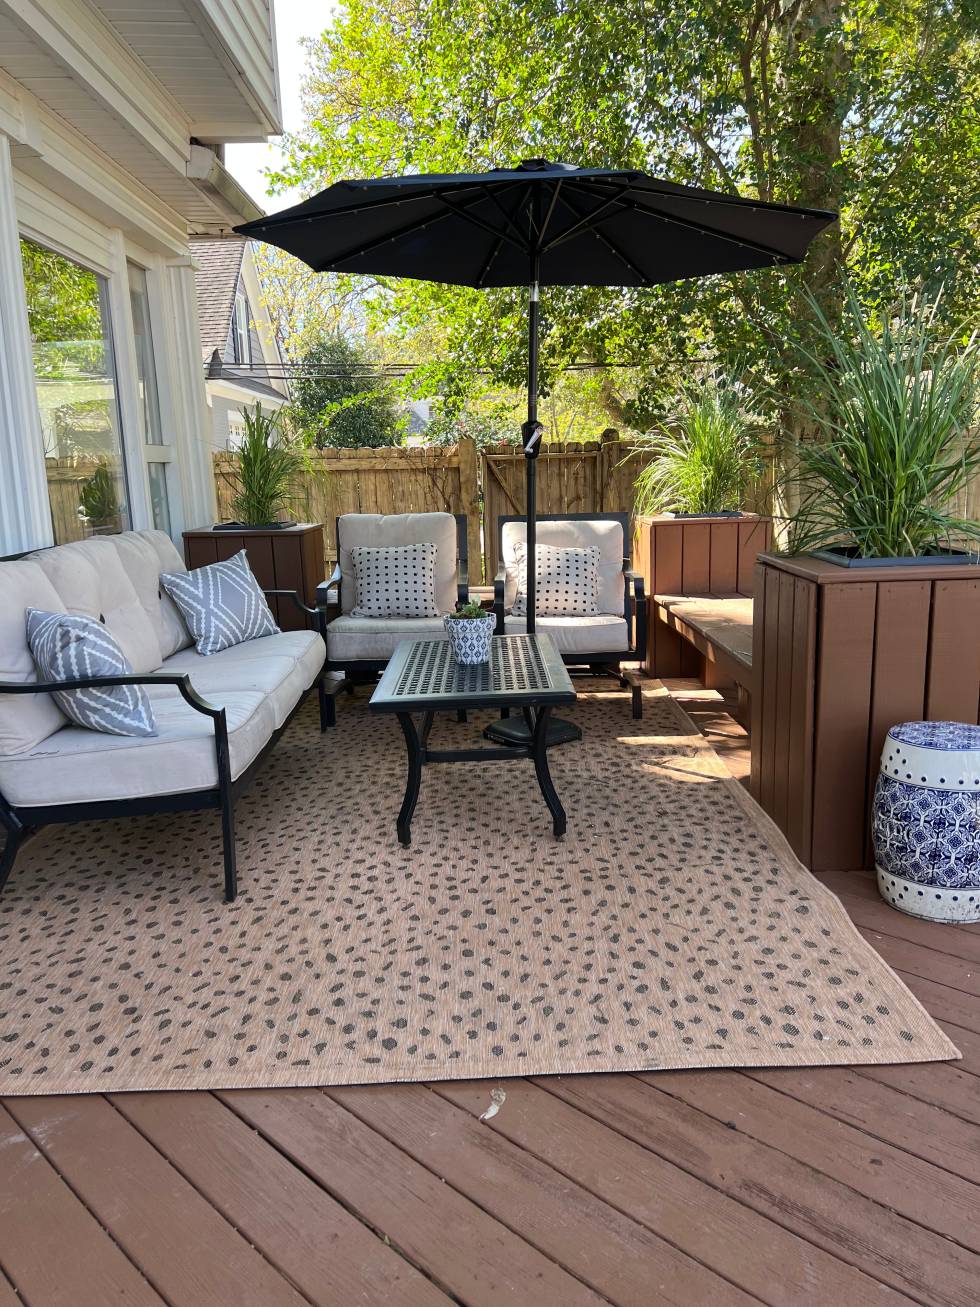 Shop My Back Deck Pillows, Outdoor Rug, Planters, Bistro Chairs and More